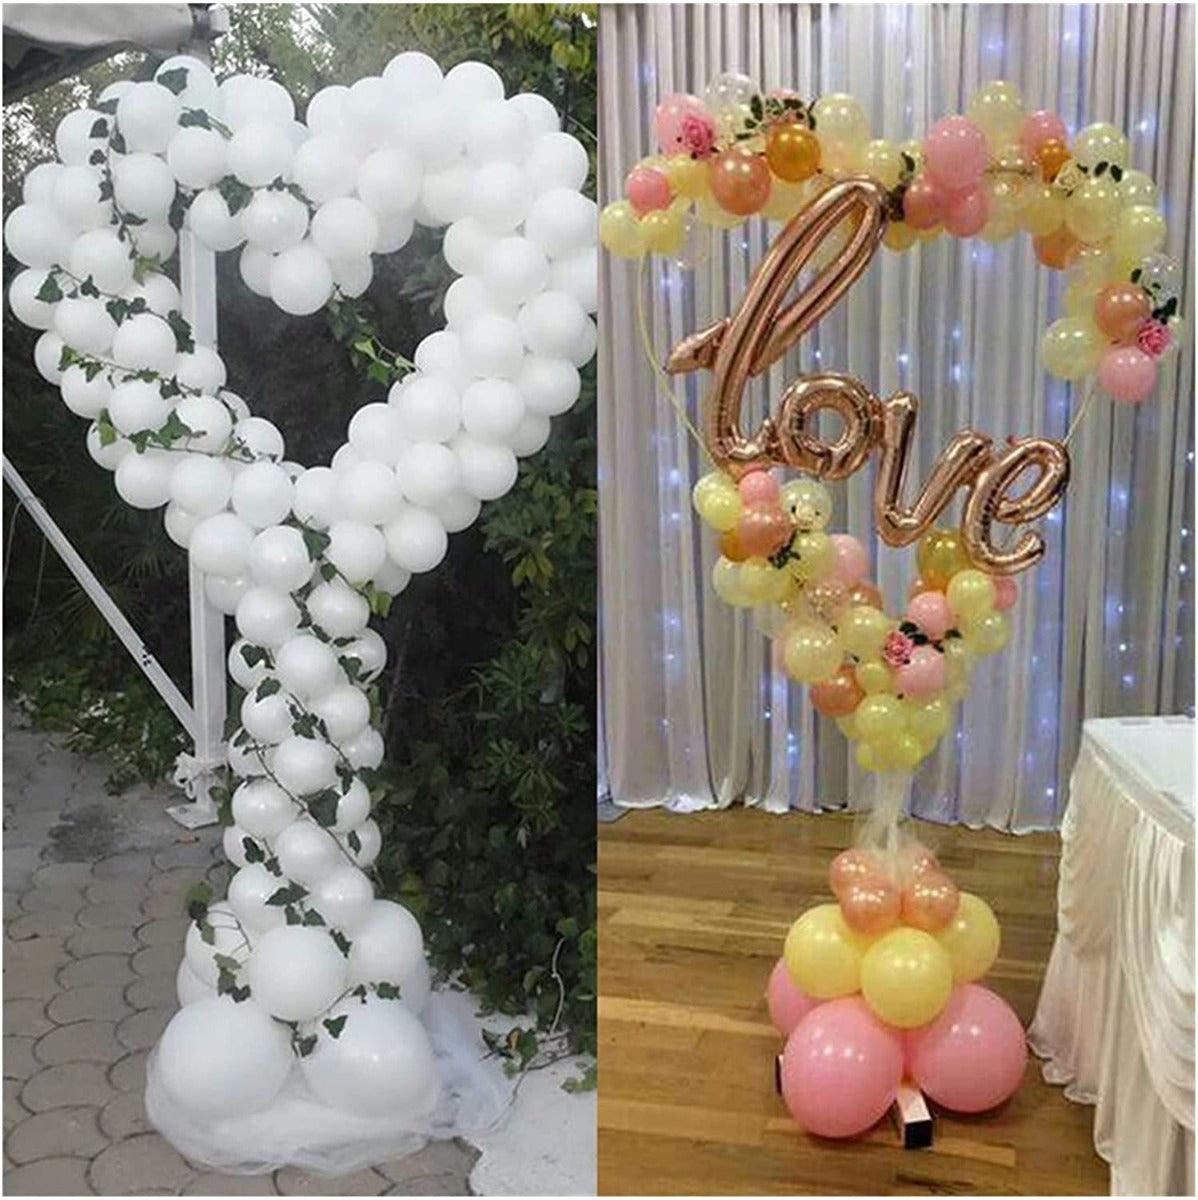 PartyCorp Heart Shaped Balloon Table Stand For Party Decorations (Balloons Not Included), 1 pc